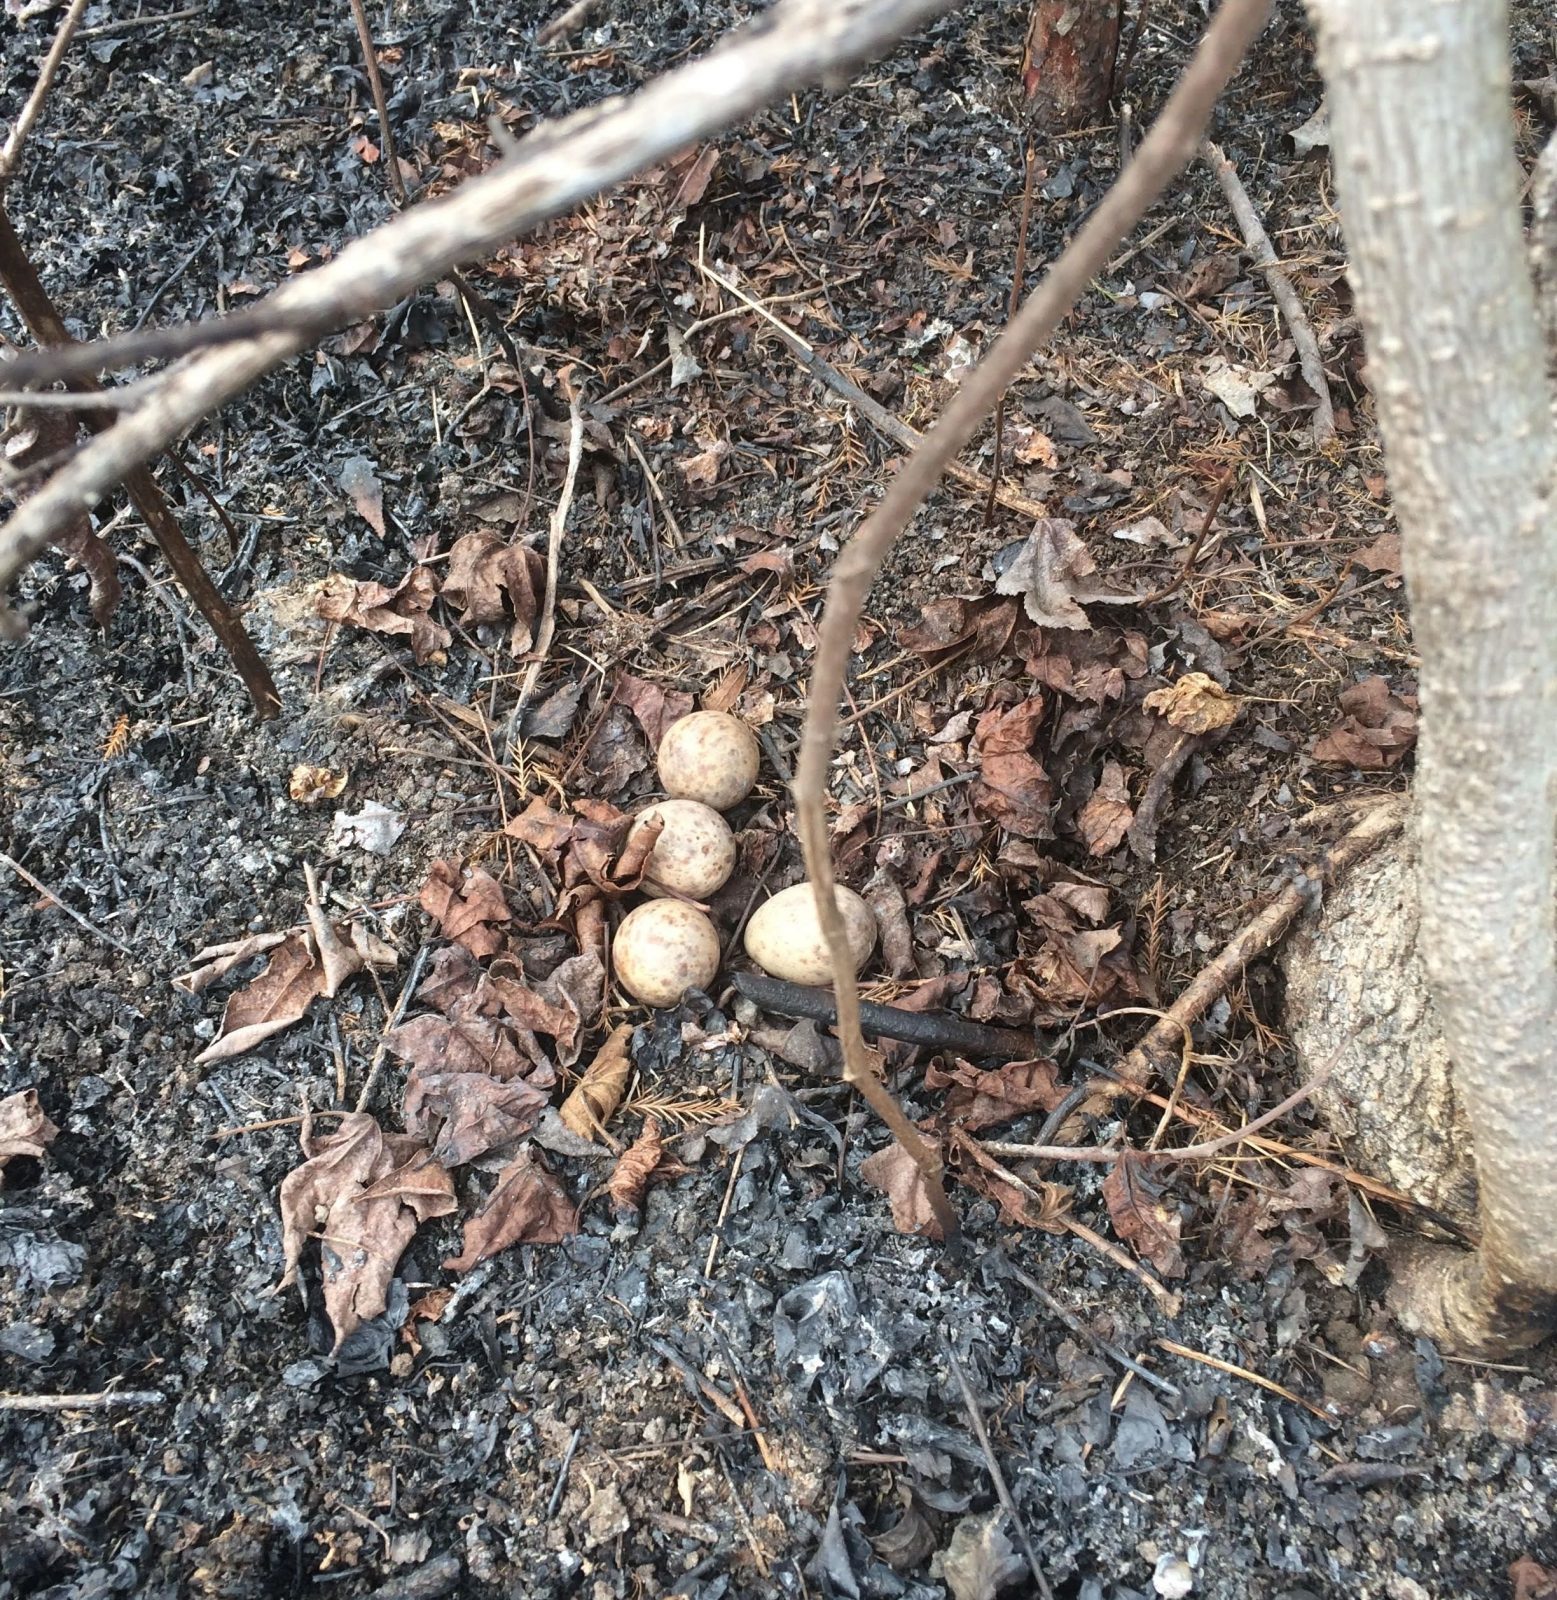 An image of four woodcock eggs laid amongst the ashes after a prescribed burn within the Featherfin Wildlife Management area; these eggs successfully hatched.